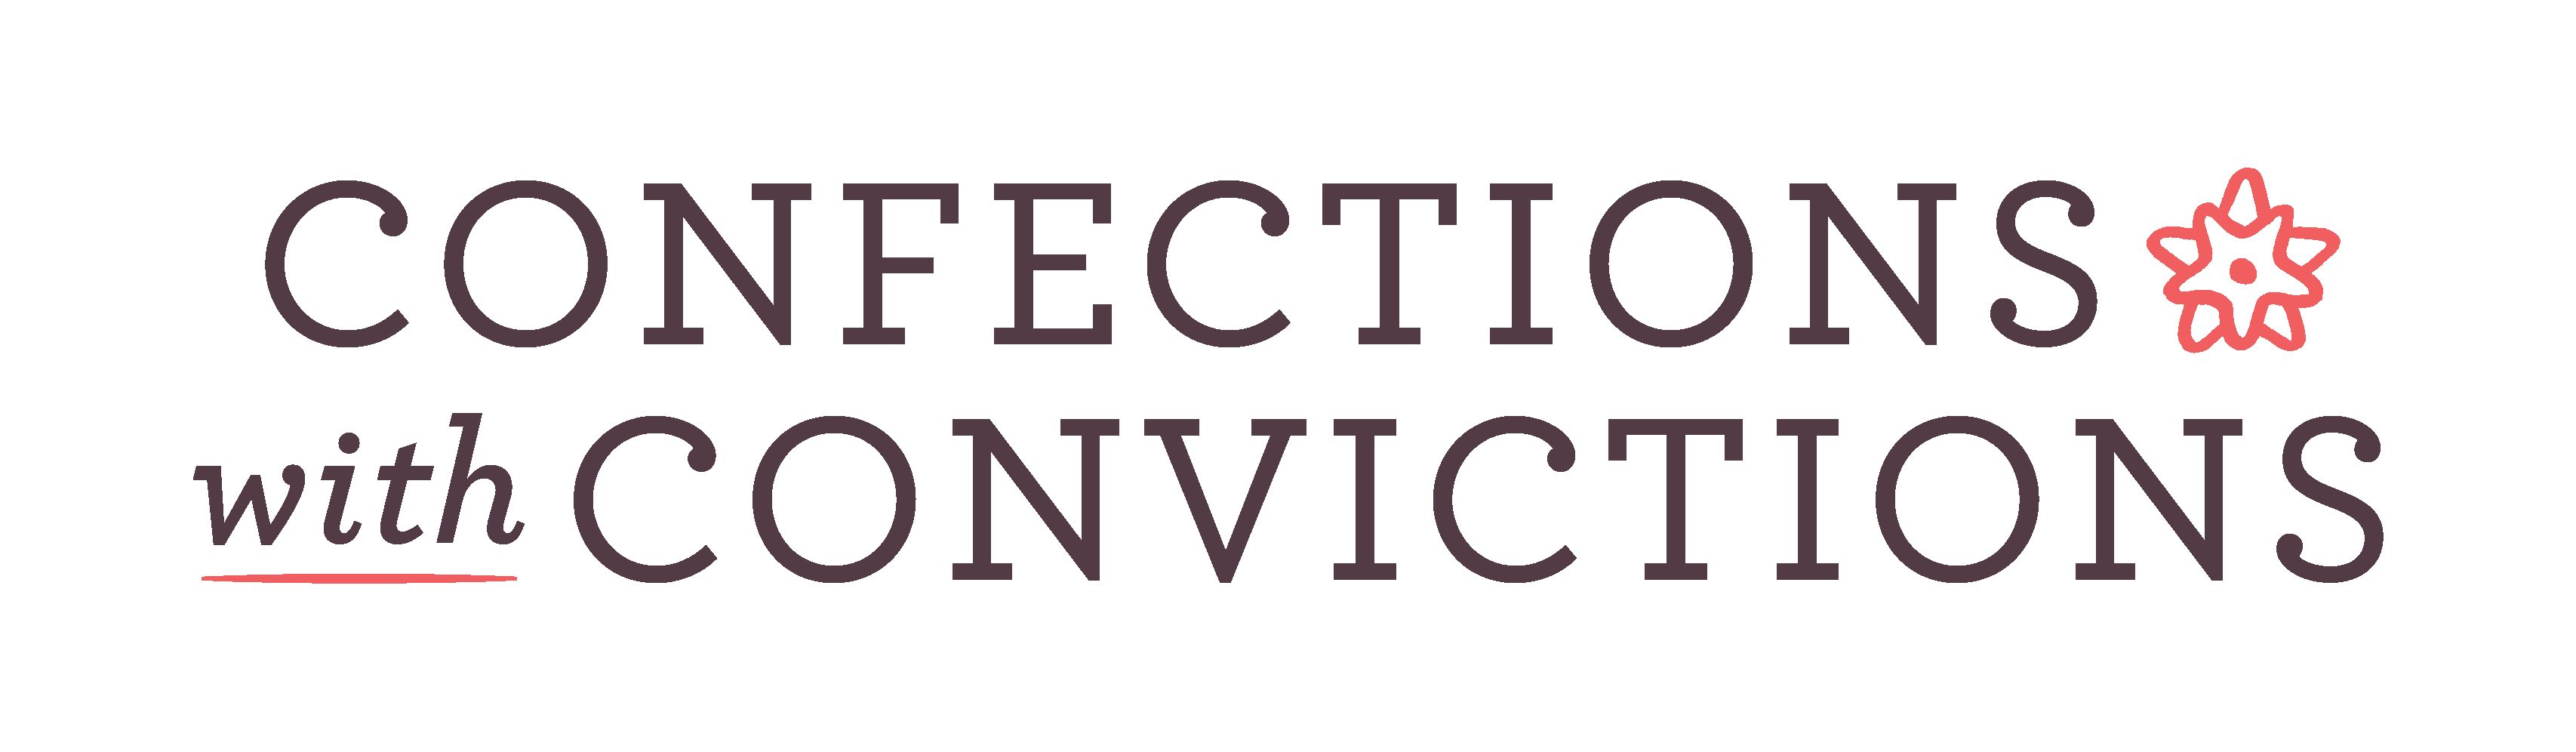 Confections With Convictions, LLC